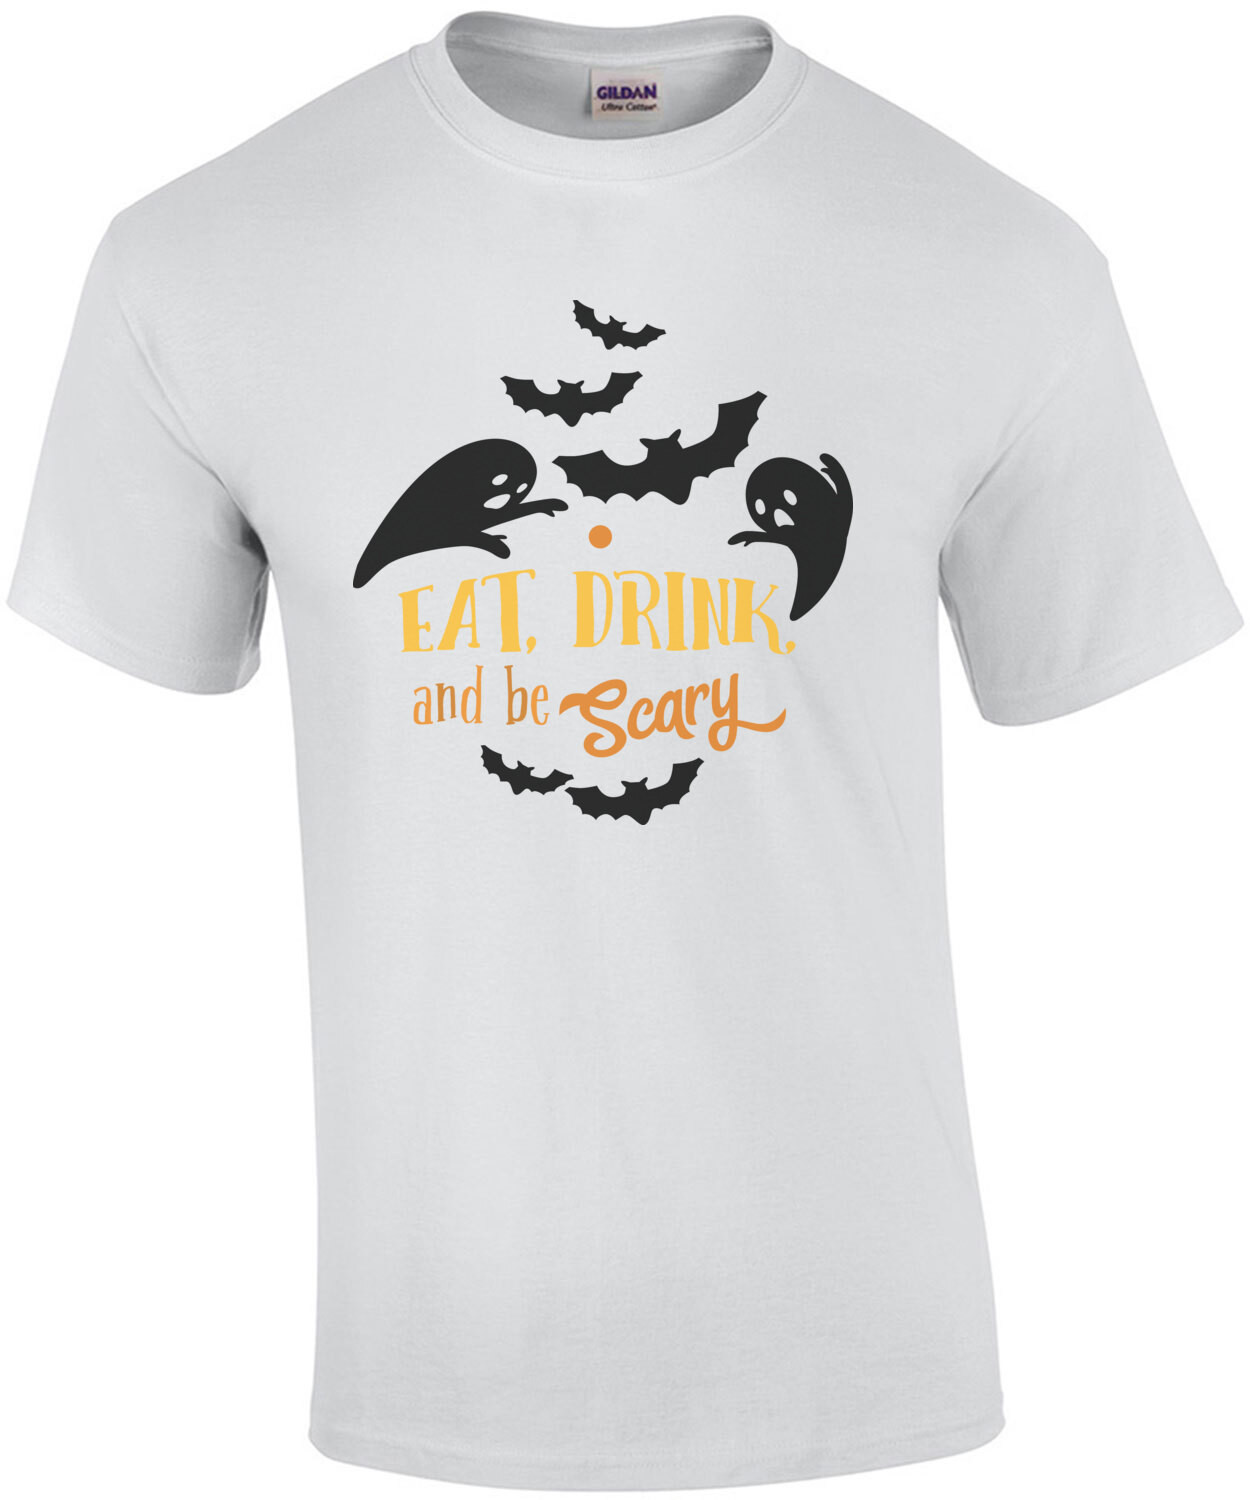 Eat, Drink, And Be SCARY - Halloween T-Shirt